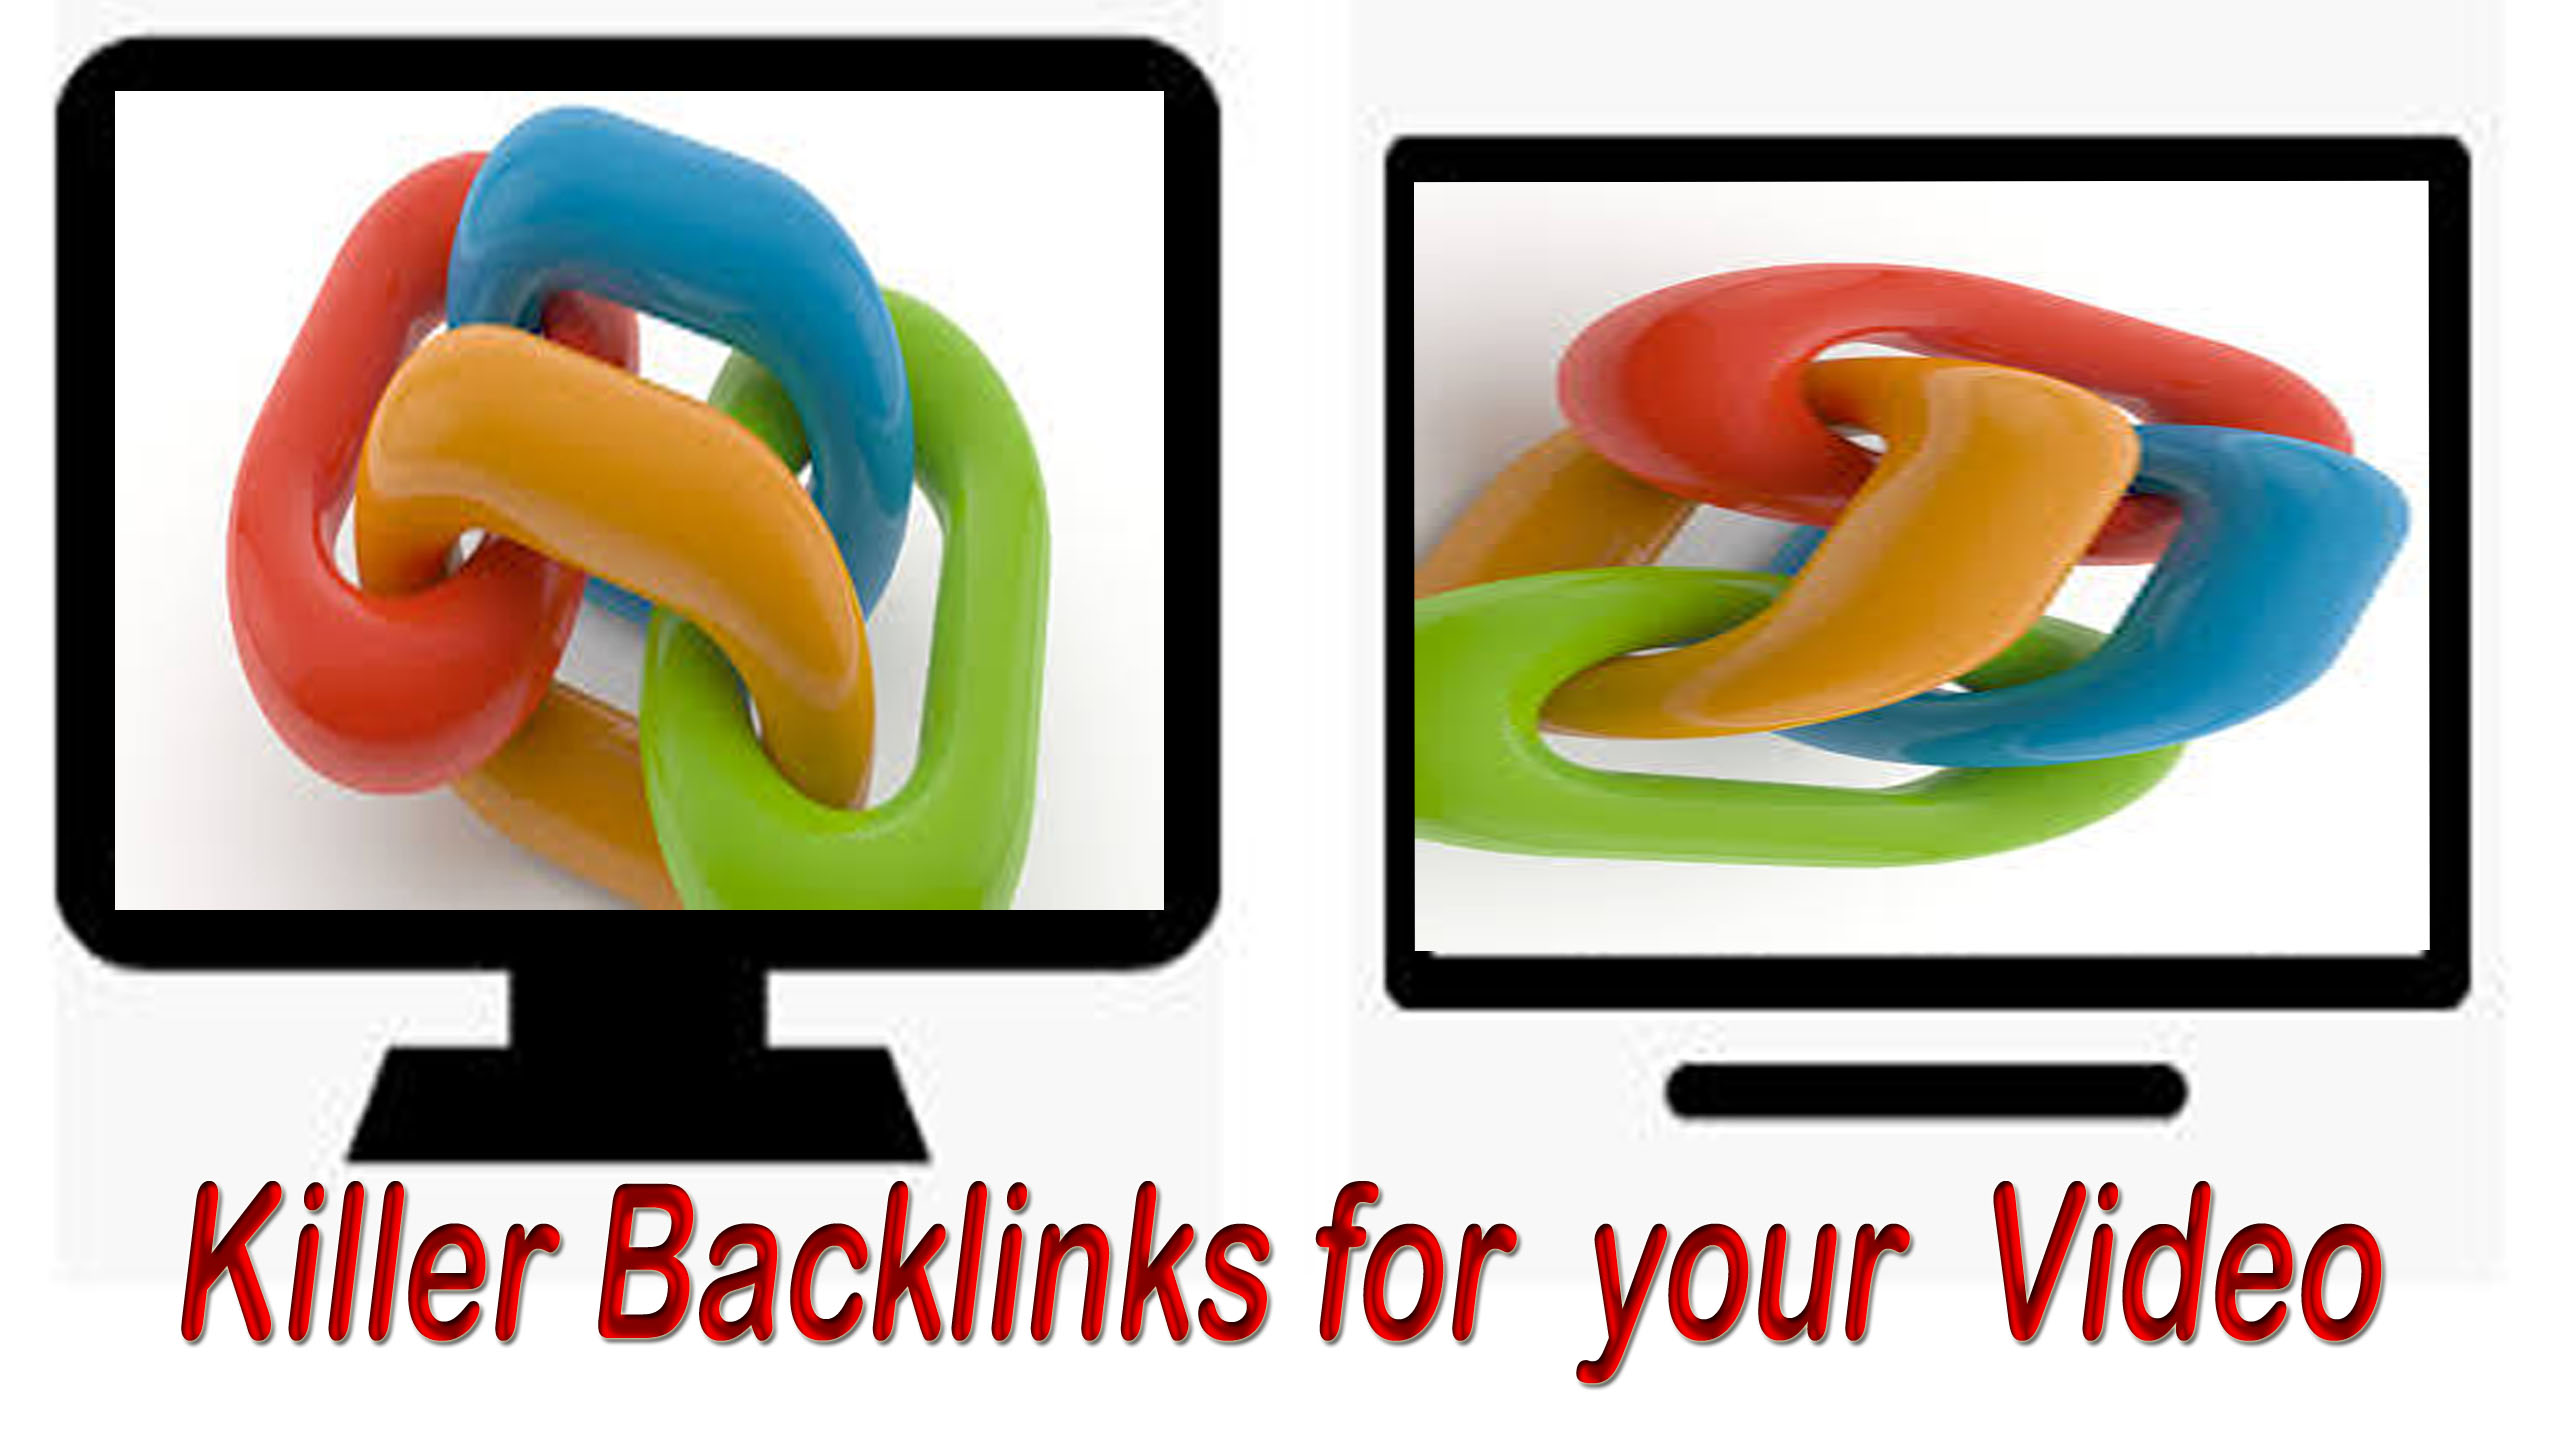 Get 1000 Plus organic Audience for your video with killer Backlinks